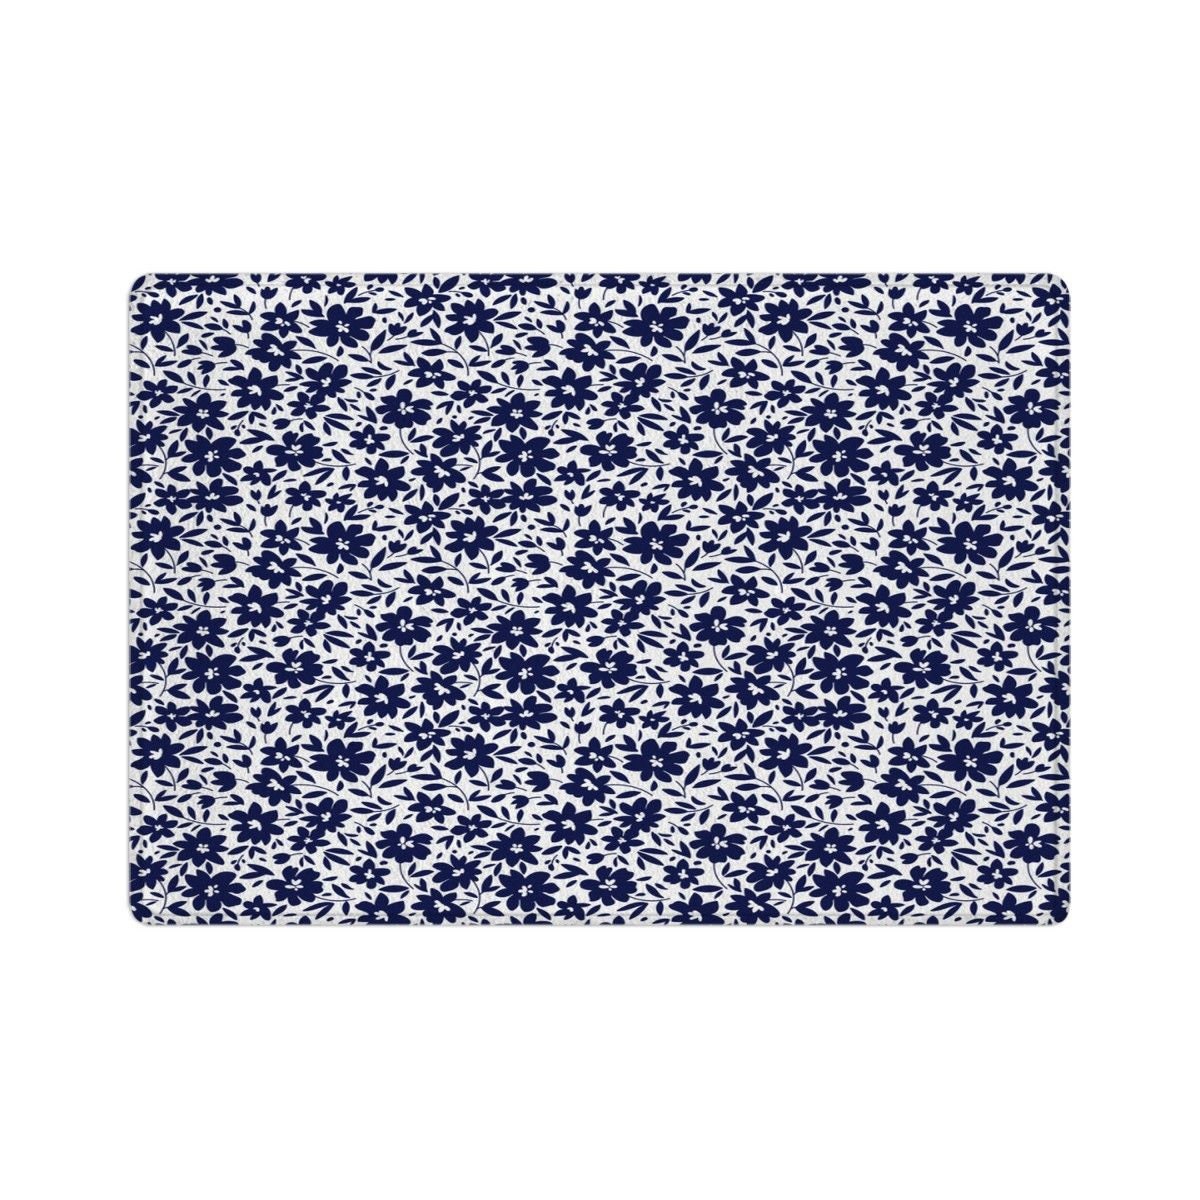 Blue Floral Bath Mats Small Navy Flowers on White Bath Rugs - Etsy UK